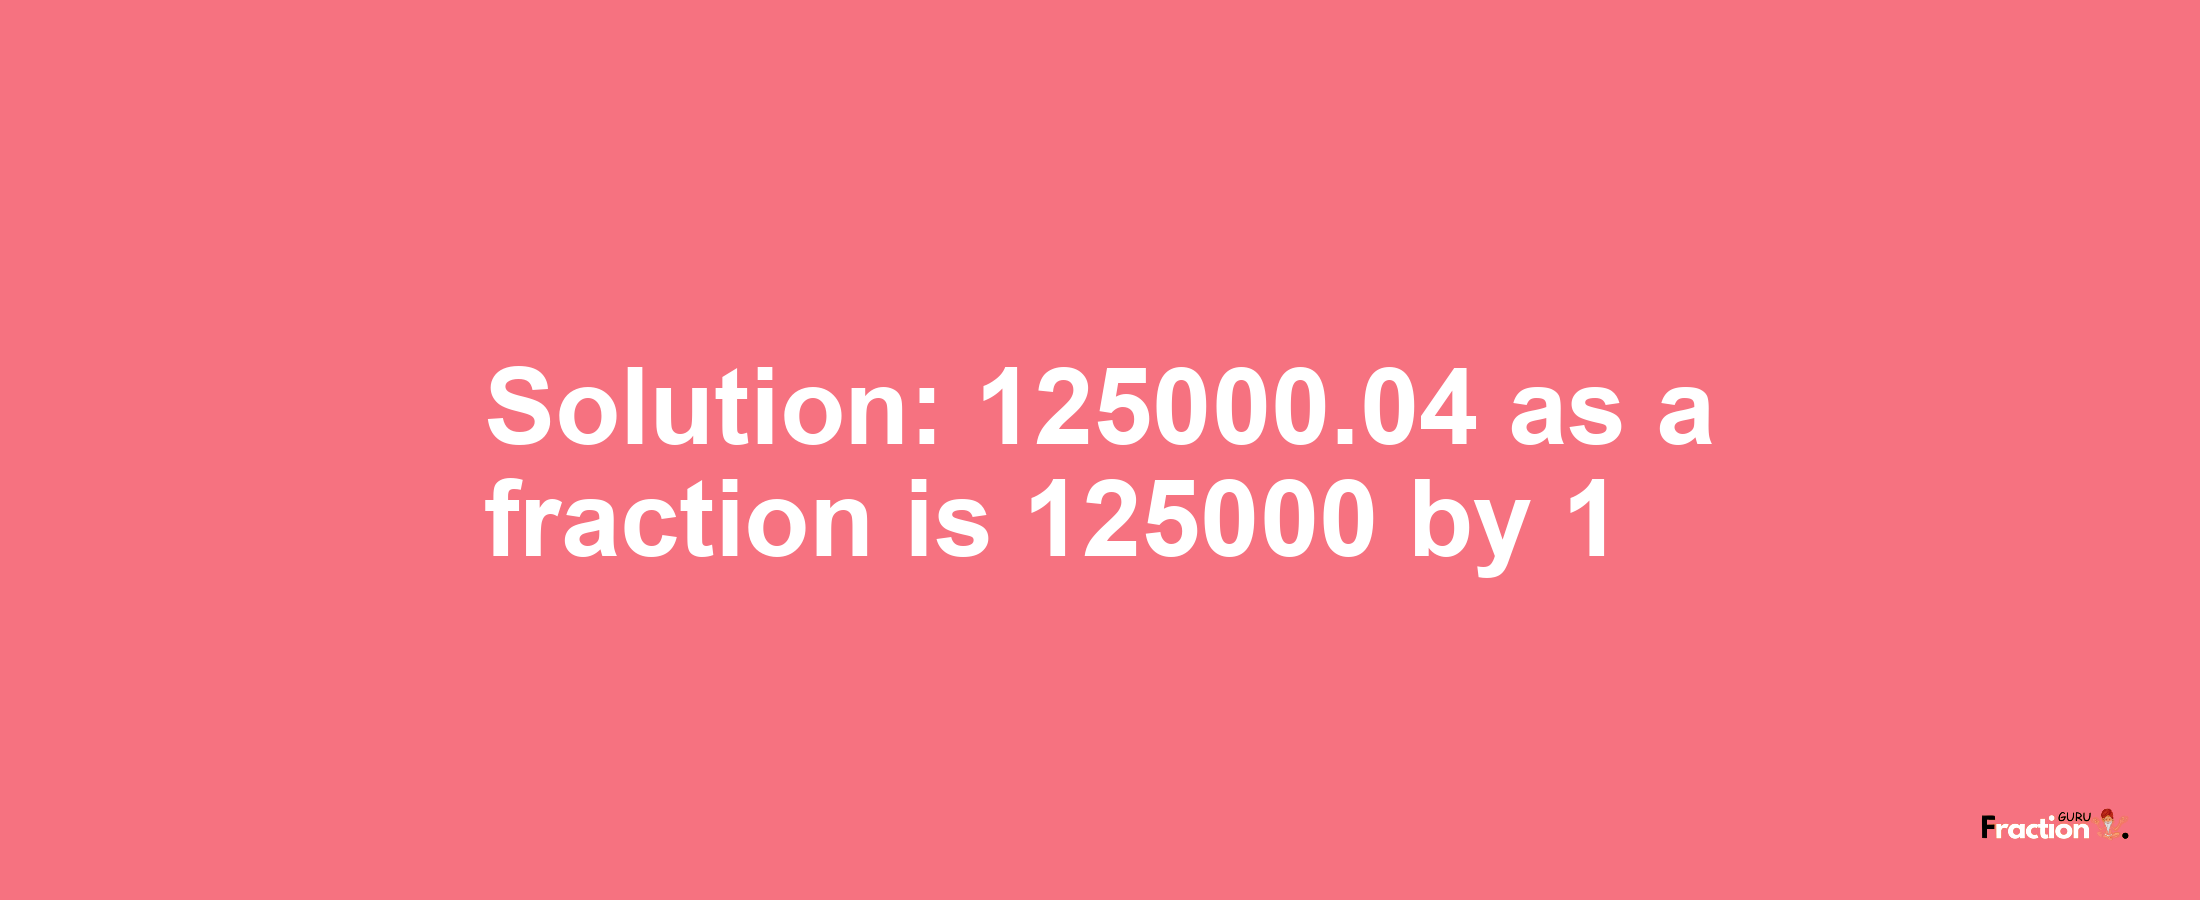 Solution:125000.04 as a fraction is 125000/1